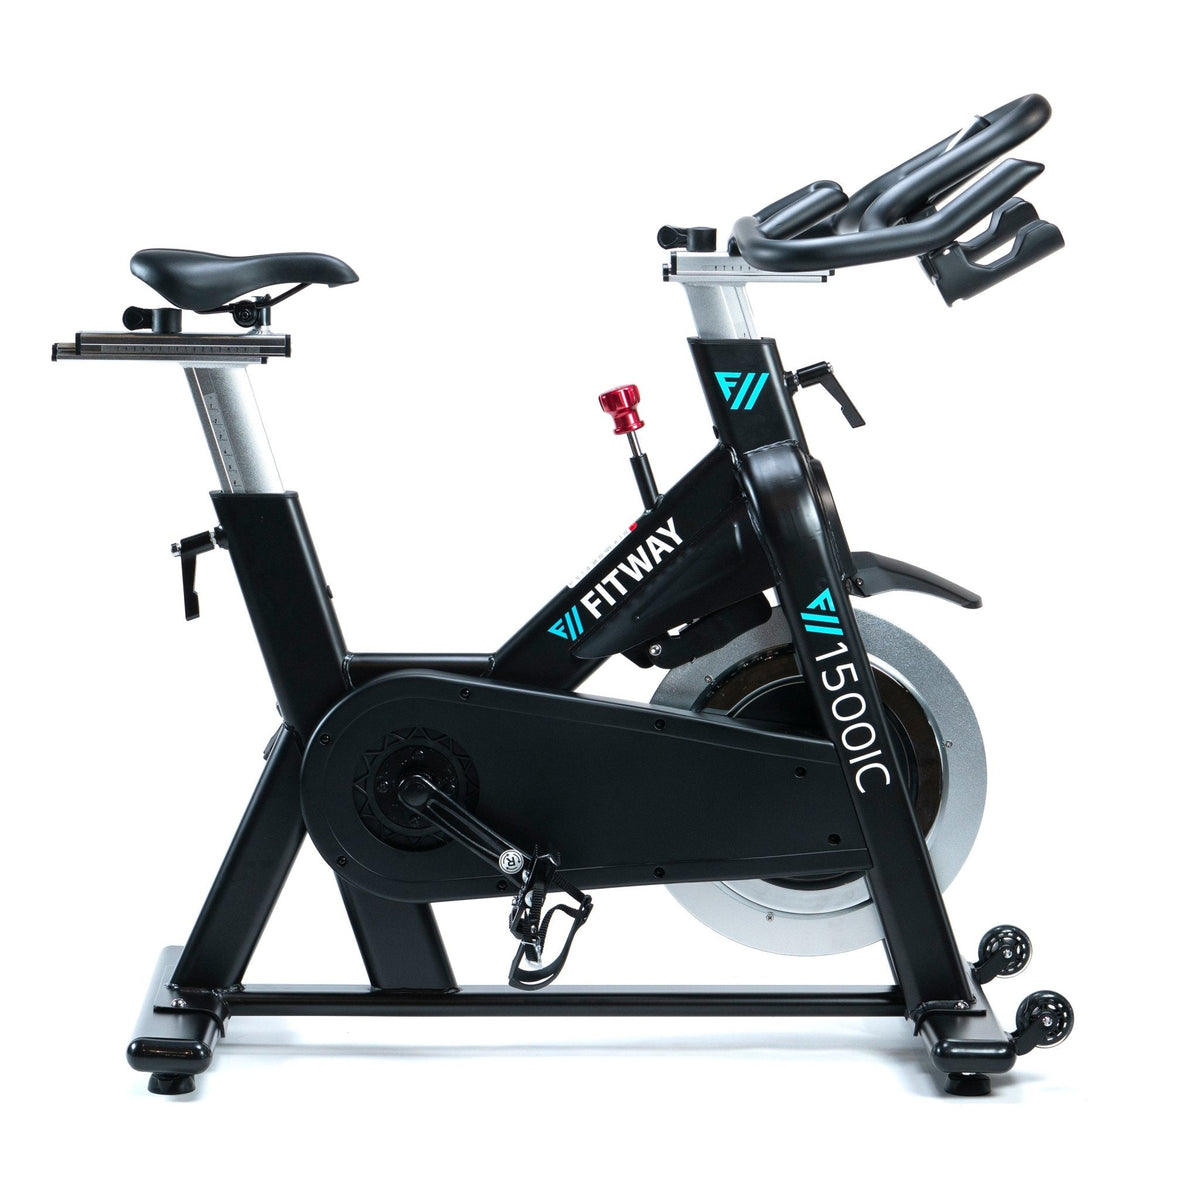 FitWay Equip. 1500IC Indoor Cycle - Angle 6